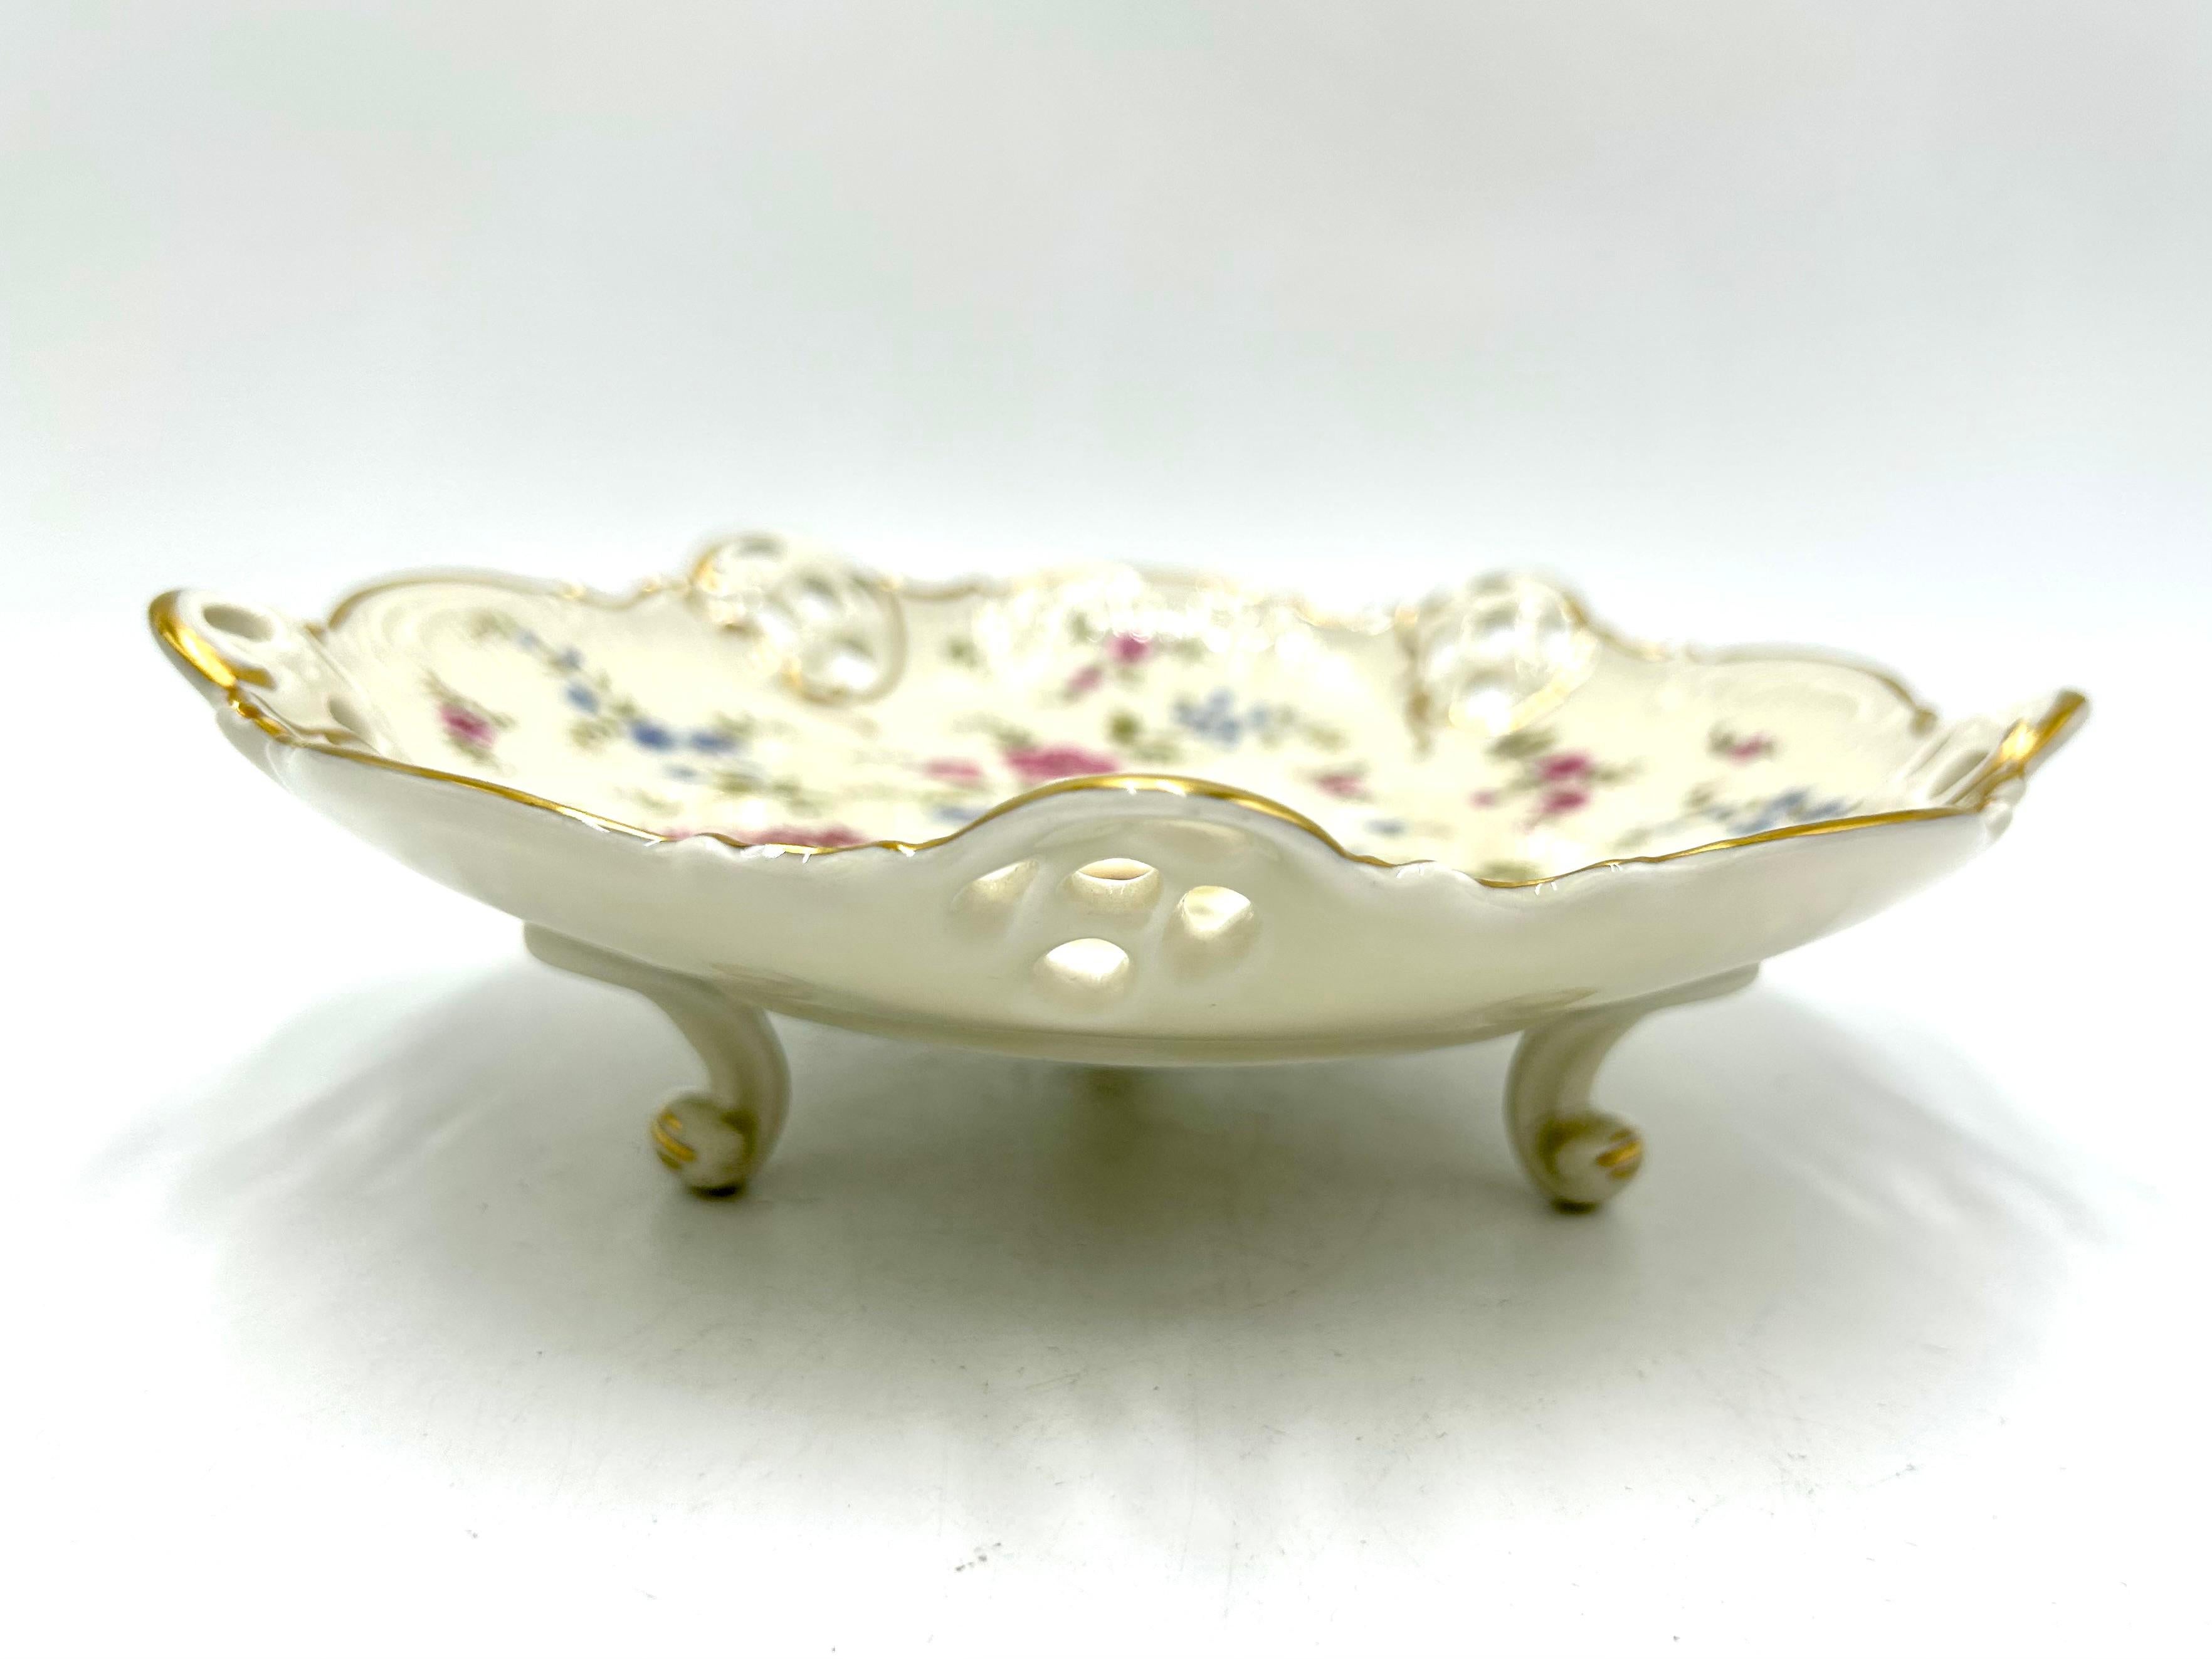 Openwork plate supported on three filigree legs from the Moliere collection, the renowned German Rosenthal label. The product is marked with the mark used in 1945. Ecru porcelain decorated with openwork sides, floral meadow motif and gilded